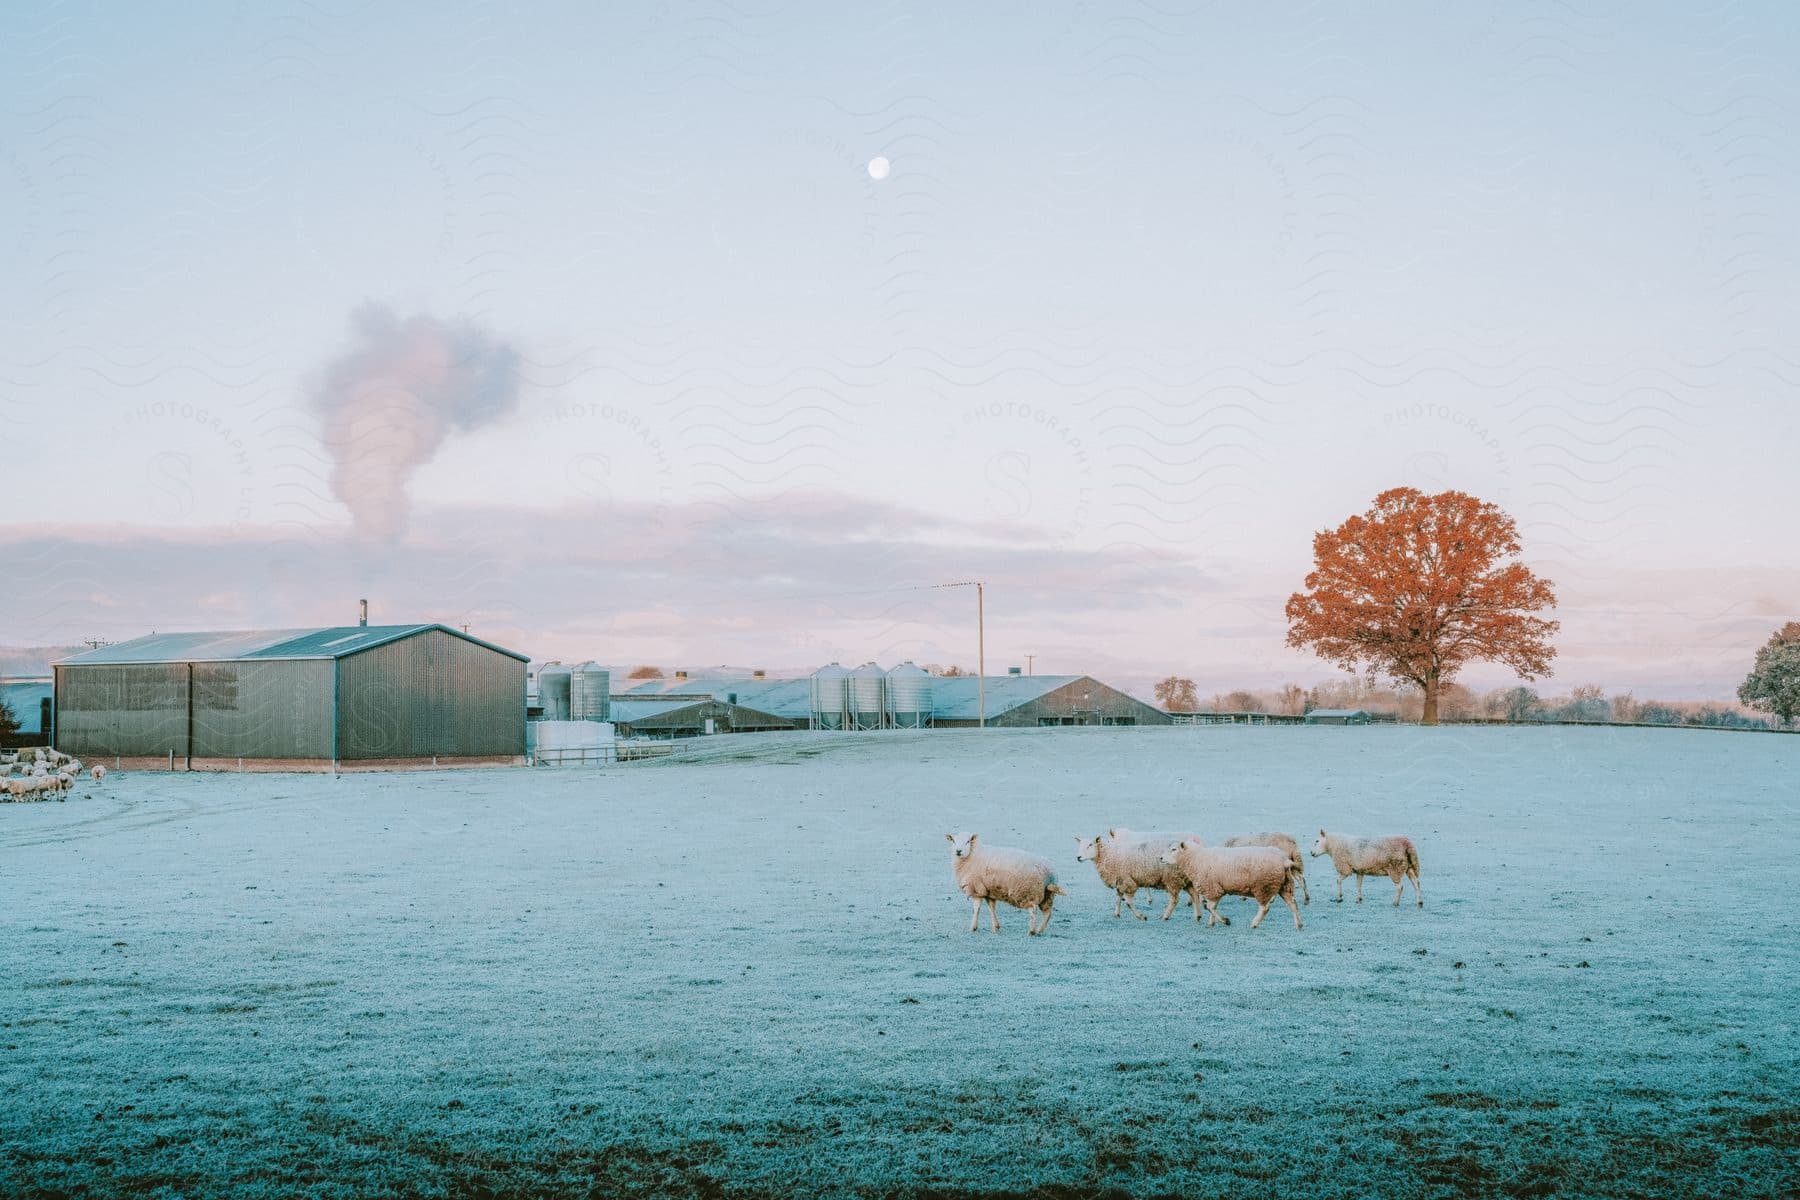 Stock photo of sheep graze in the pasture near agricultural outbuildings.